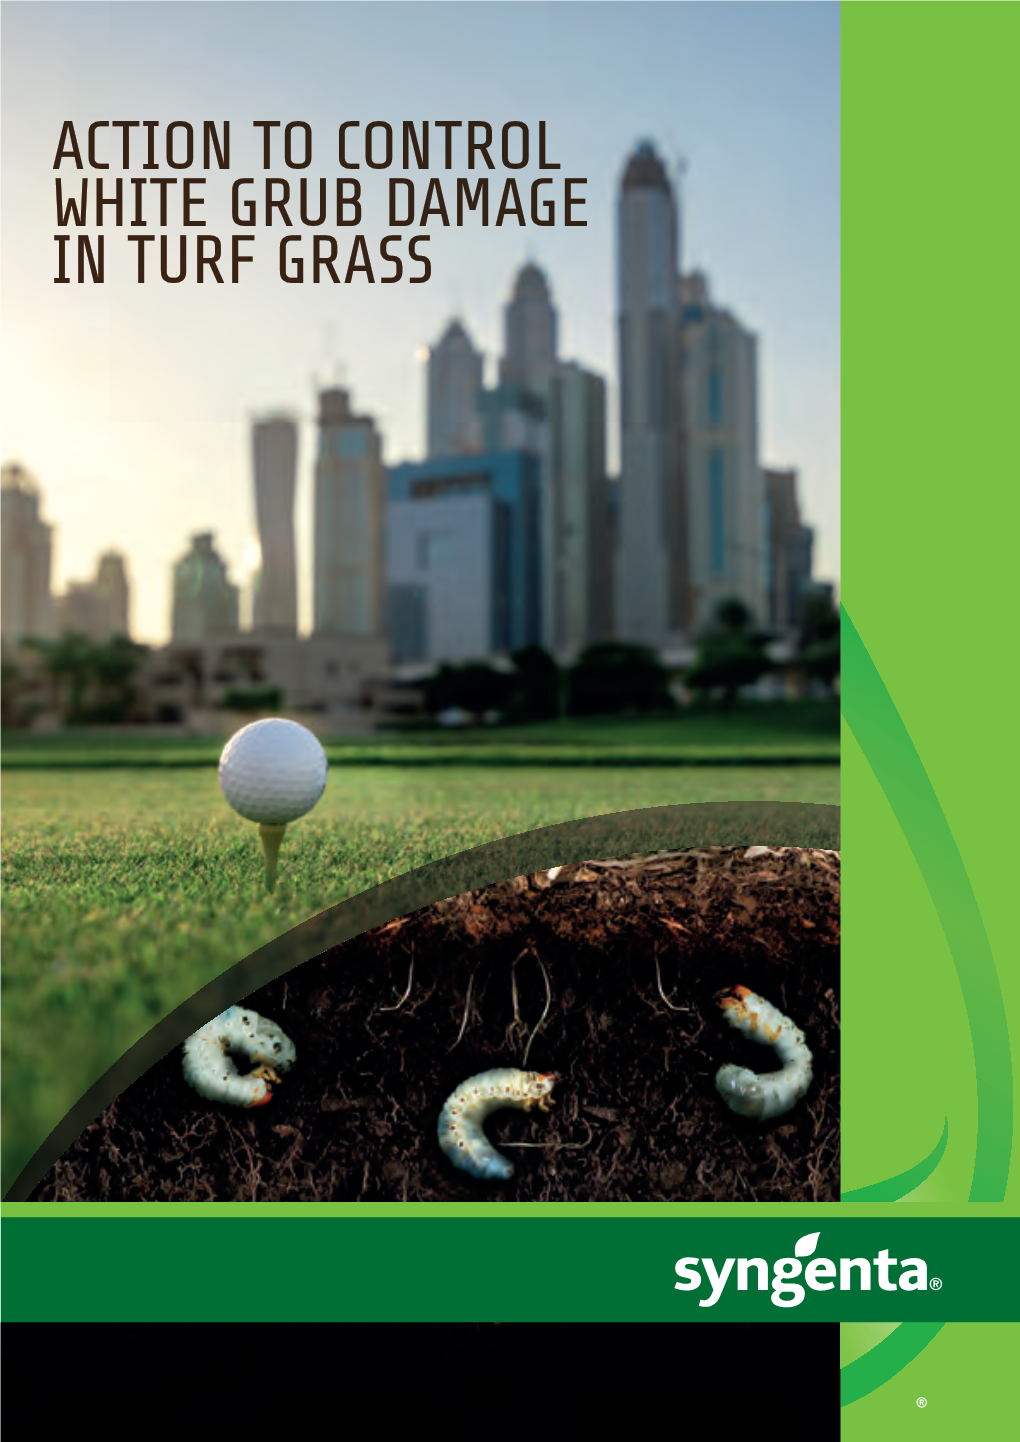 Action to Control White Grub Damage in Turf Grass